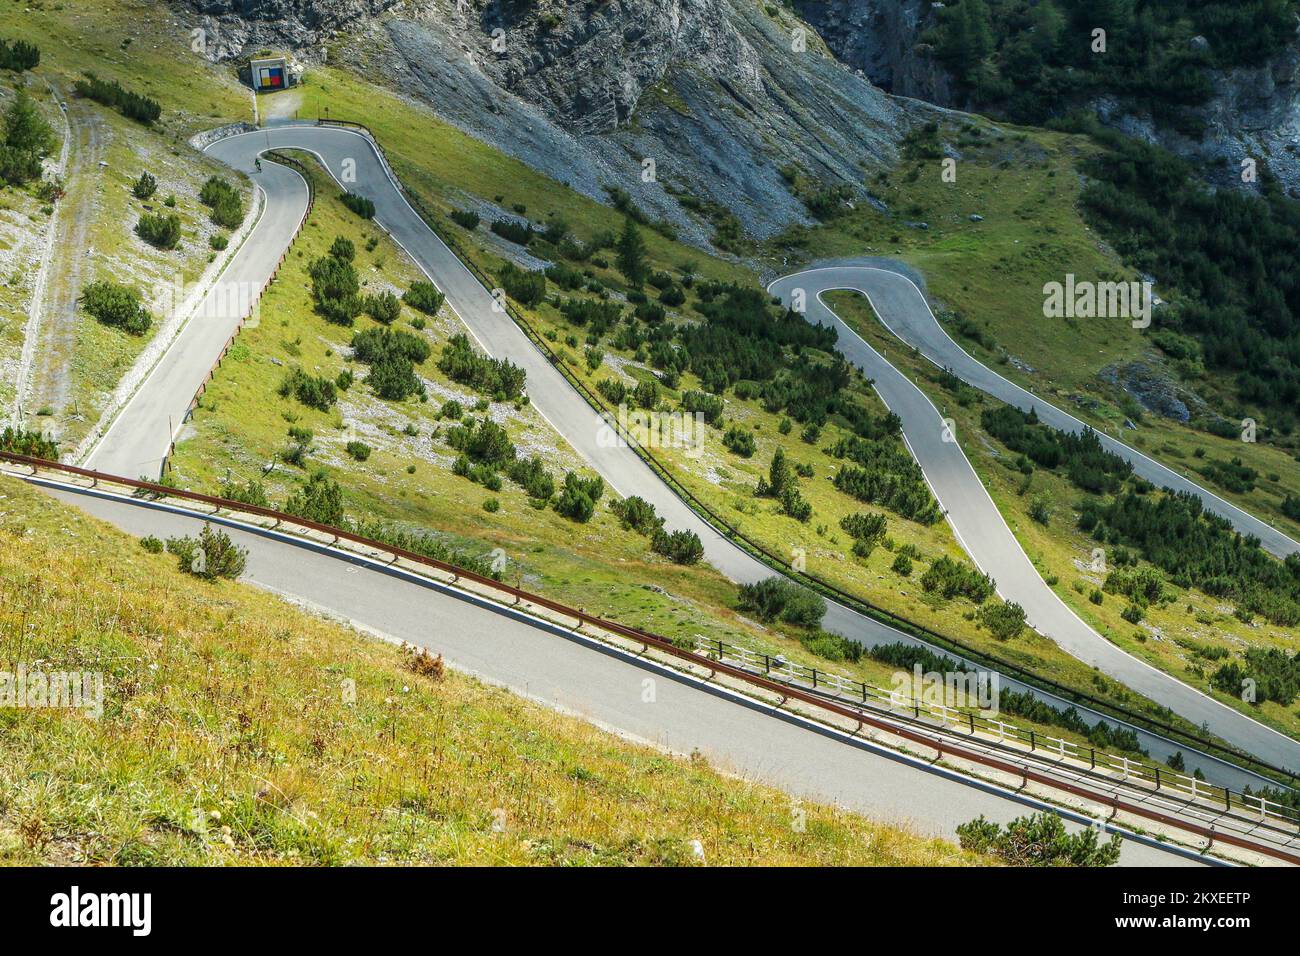 The detail of the hairpins of the challenging road towards the famous Stelvio Pass in the italian Alps, close to Switzerland. Stock Photo